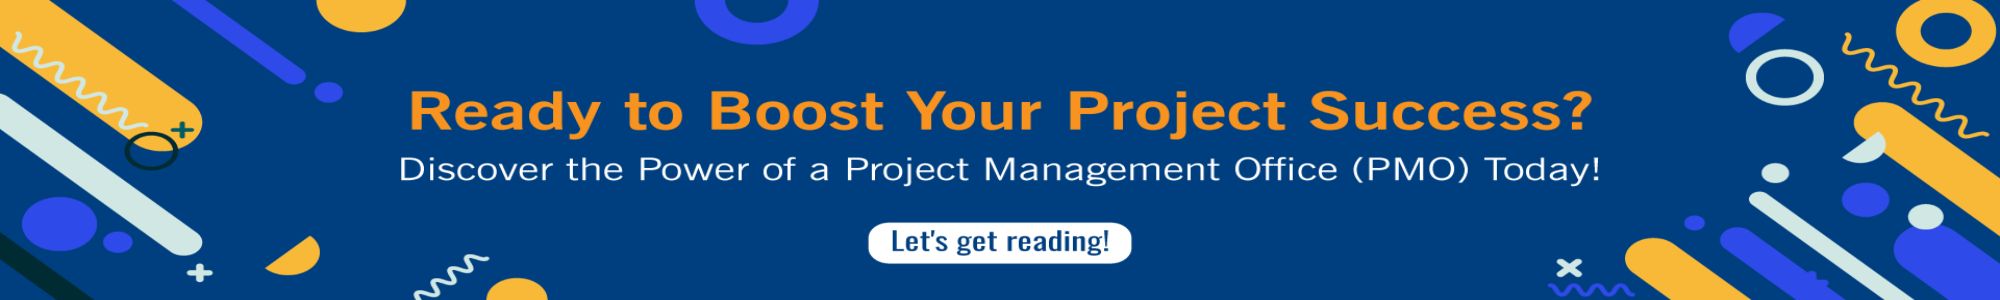 Power of a project management office (PMO)